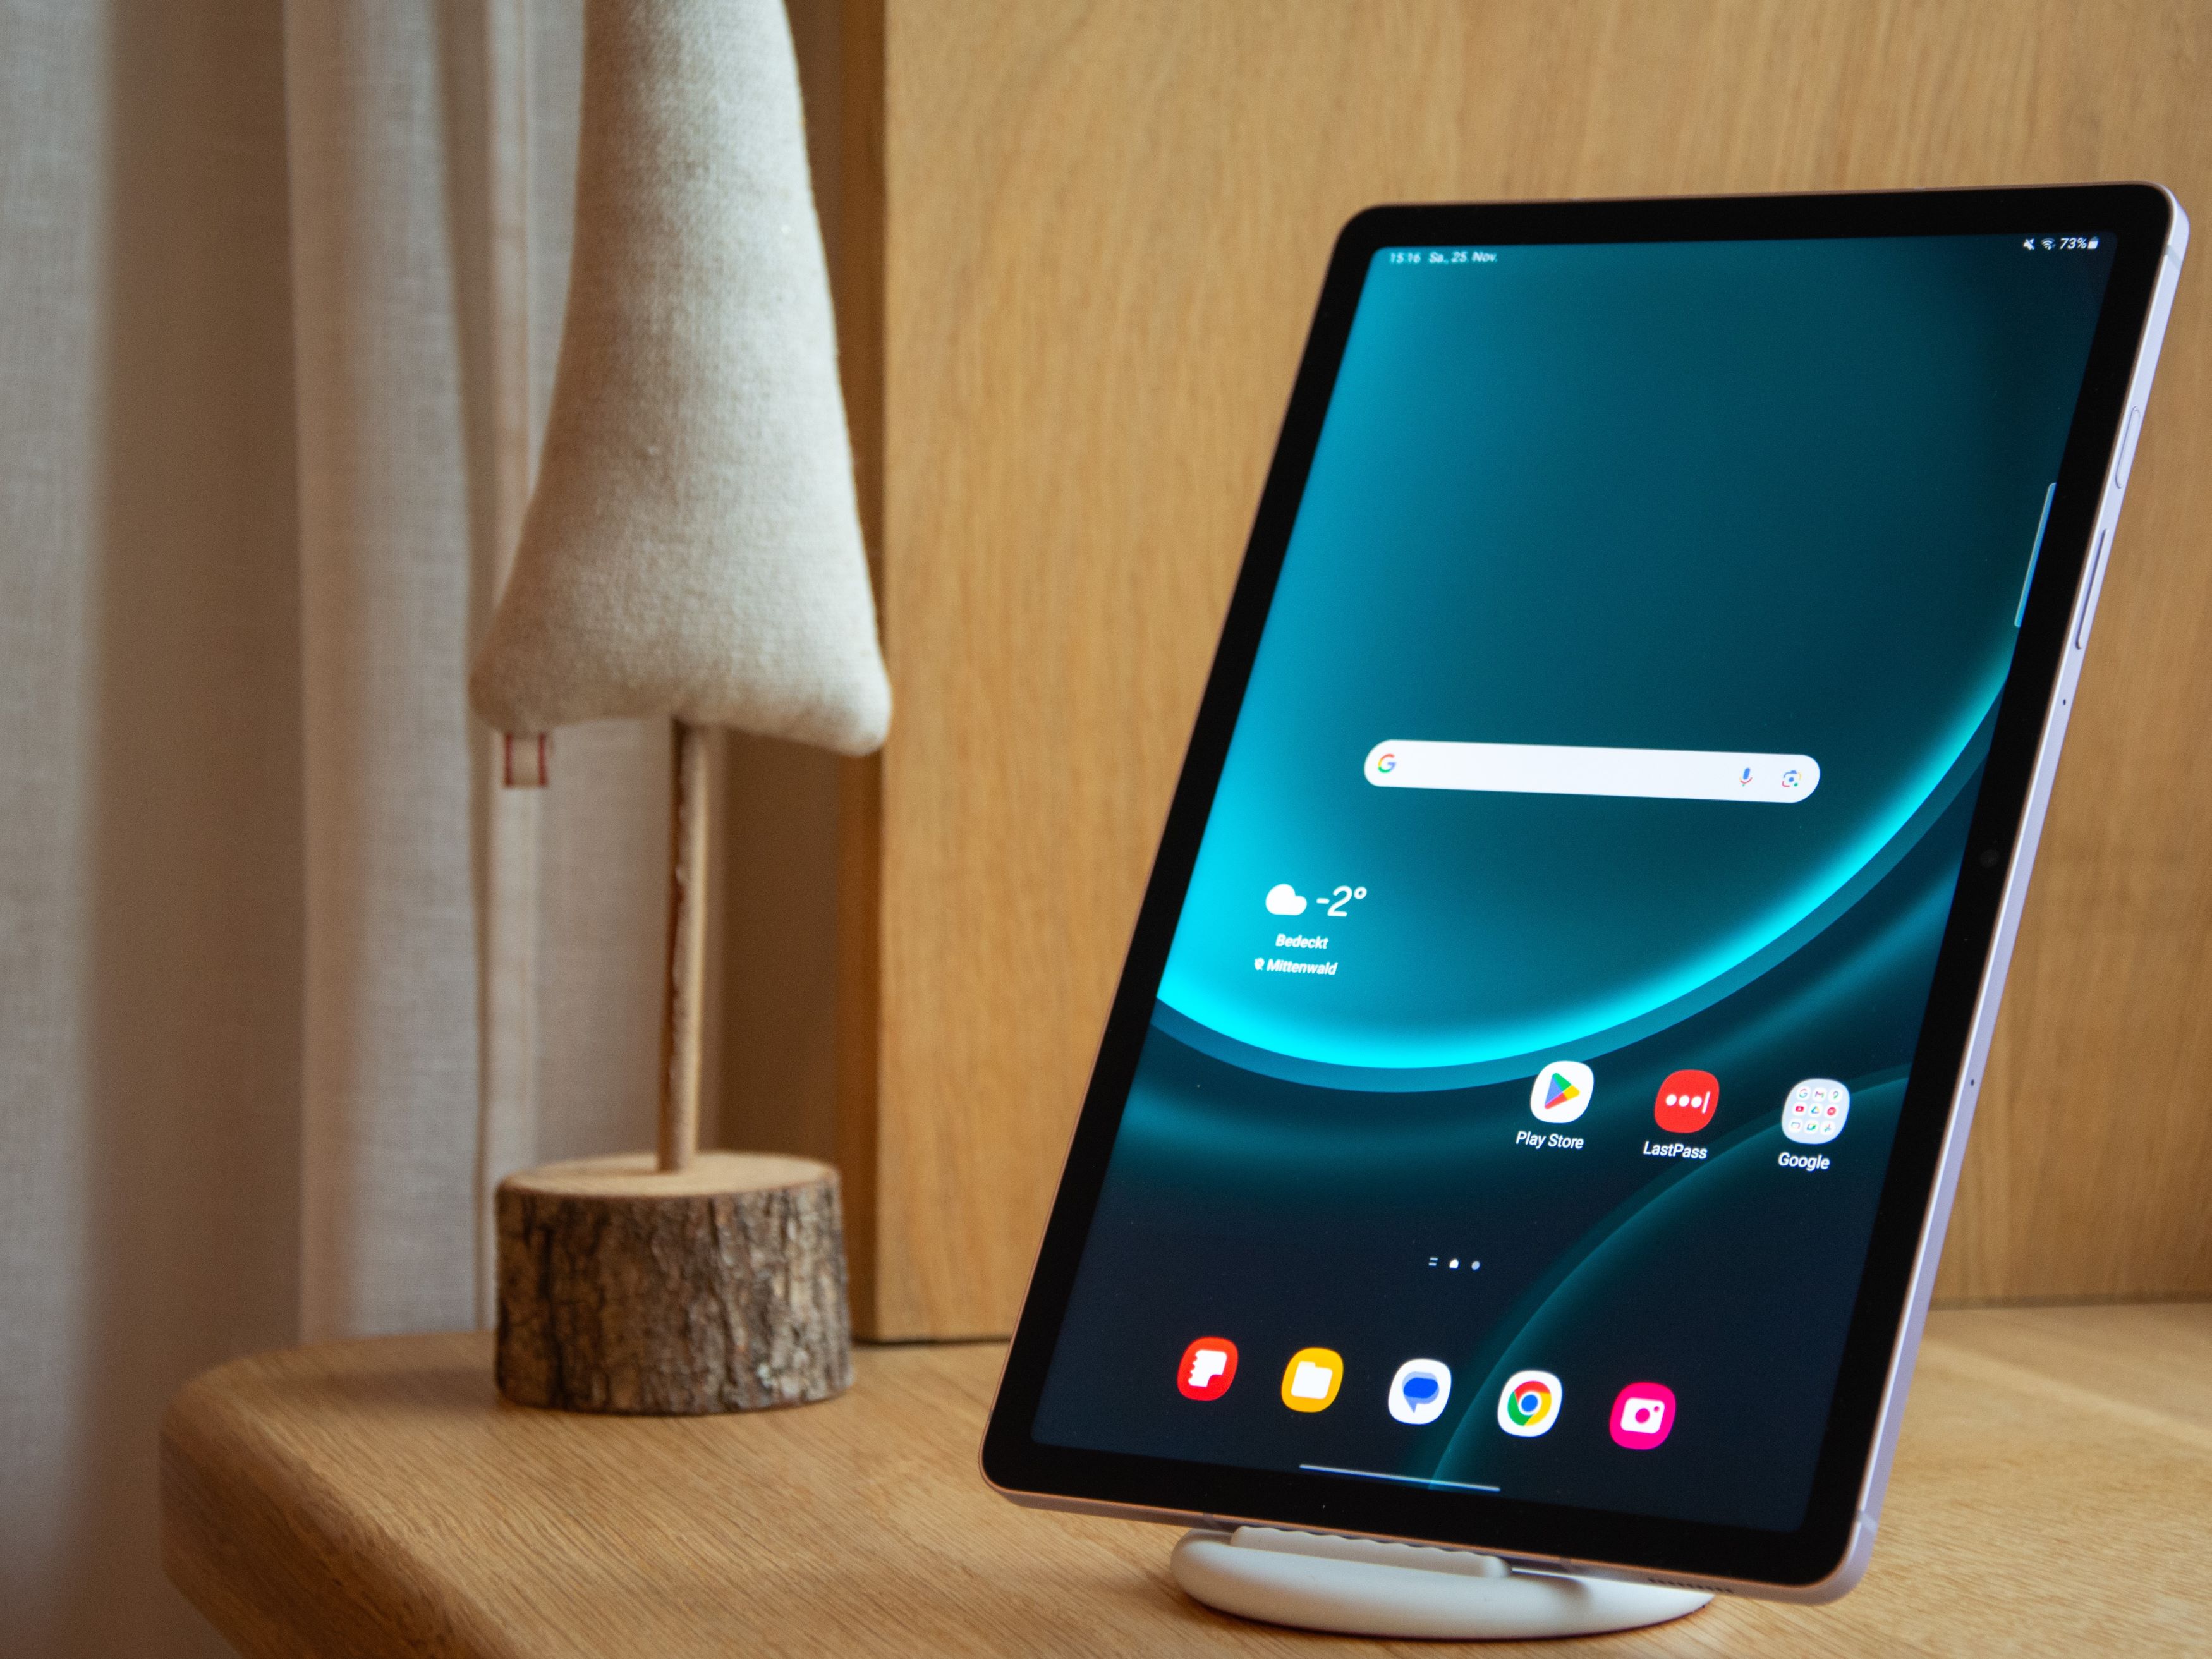 Samsung Galaxy Tab S7 FE 5G – Colors, Features & Reviews